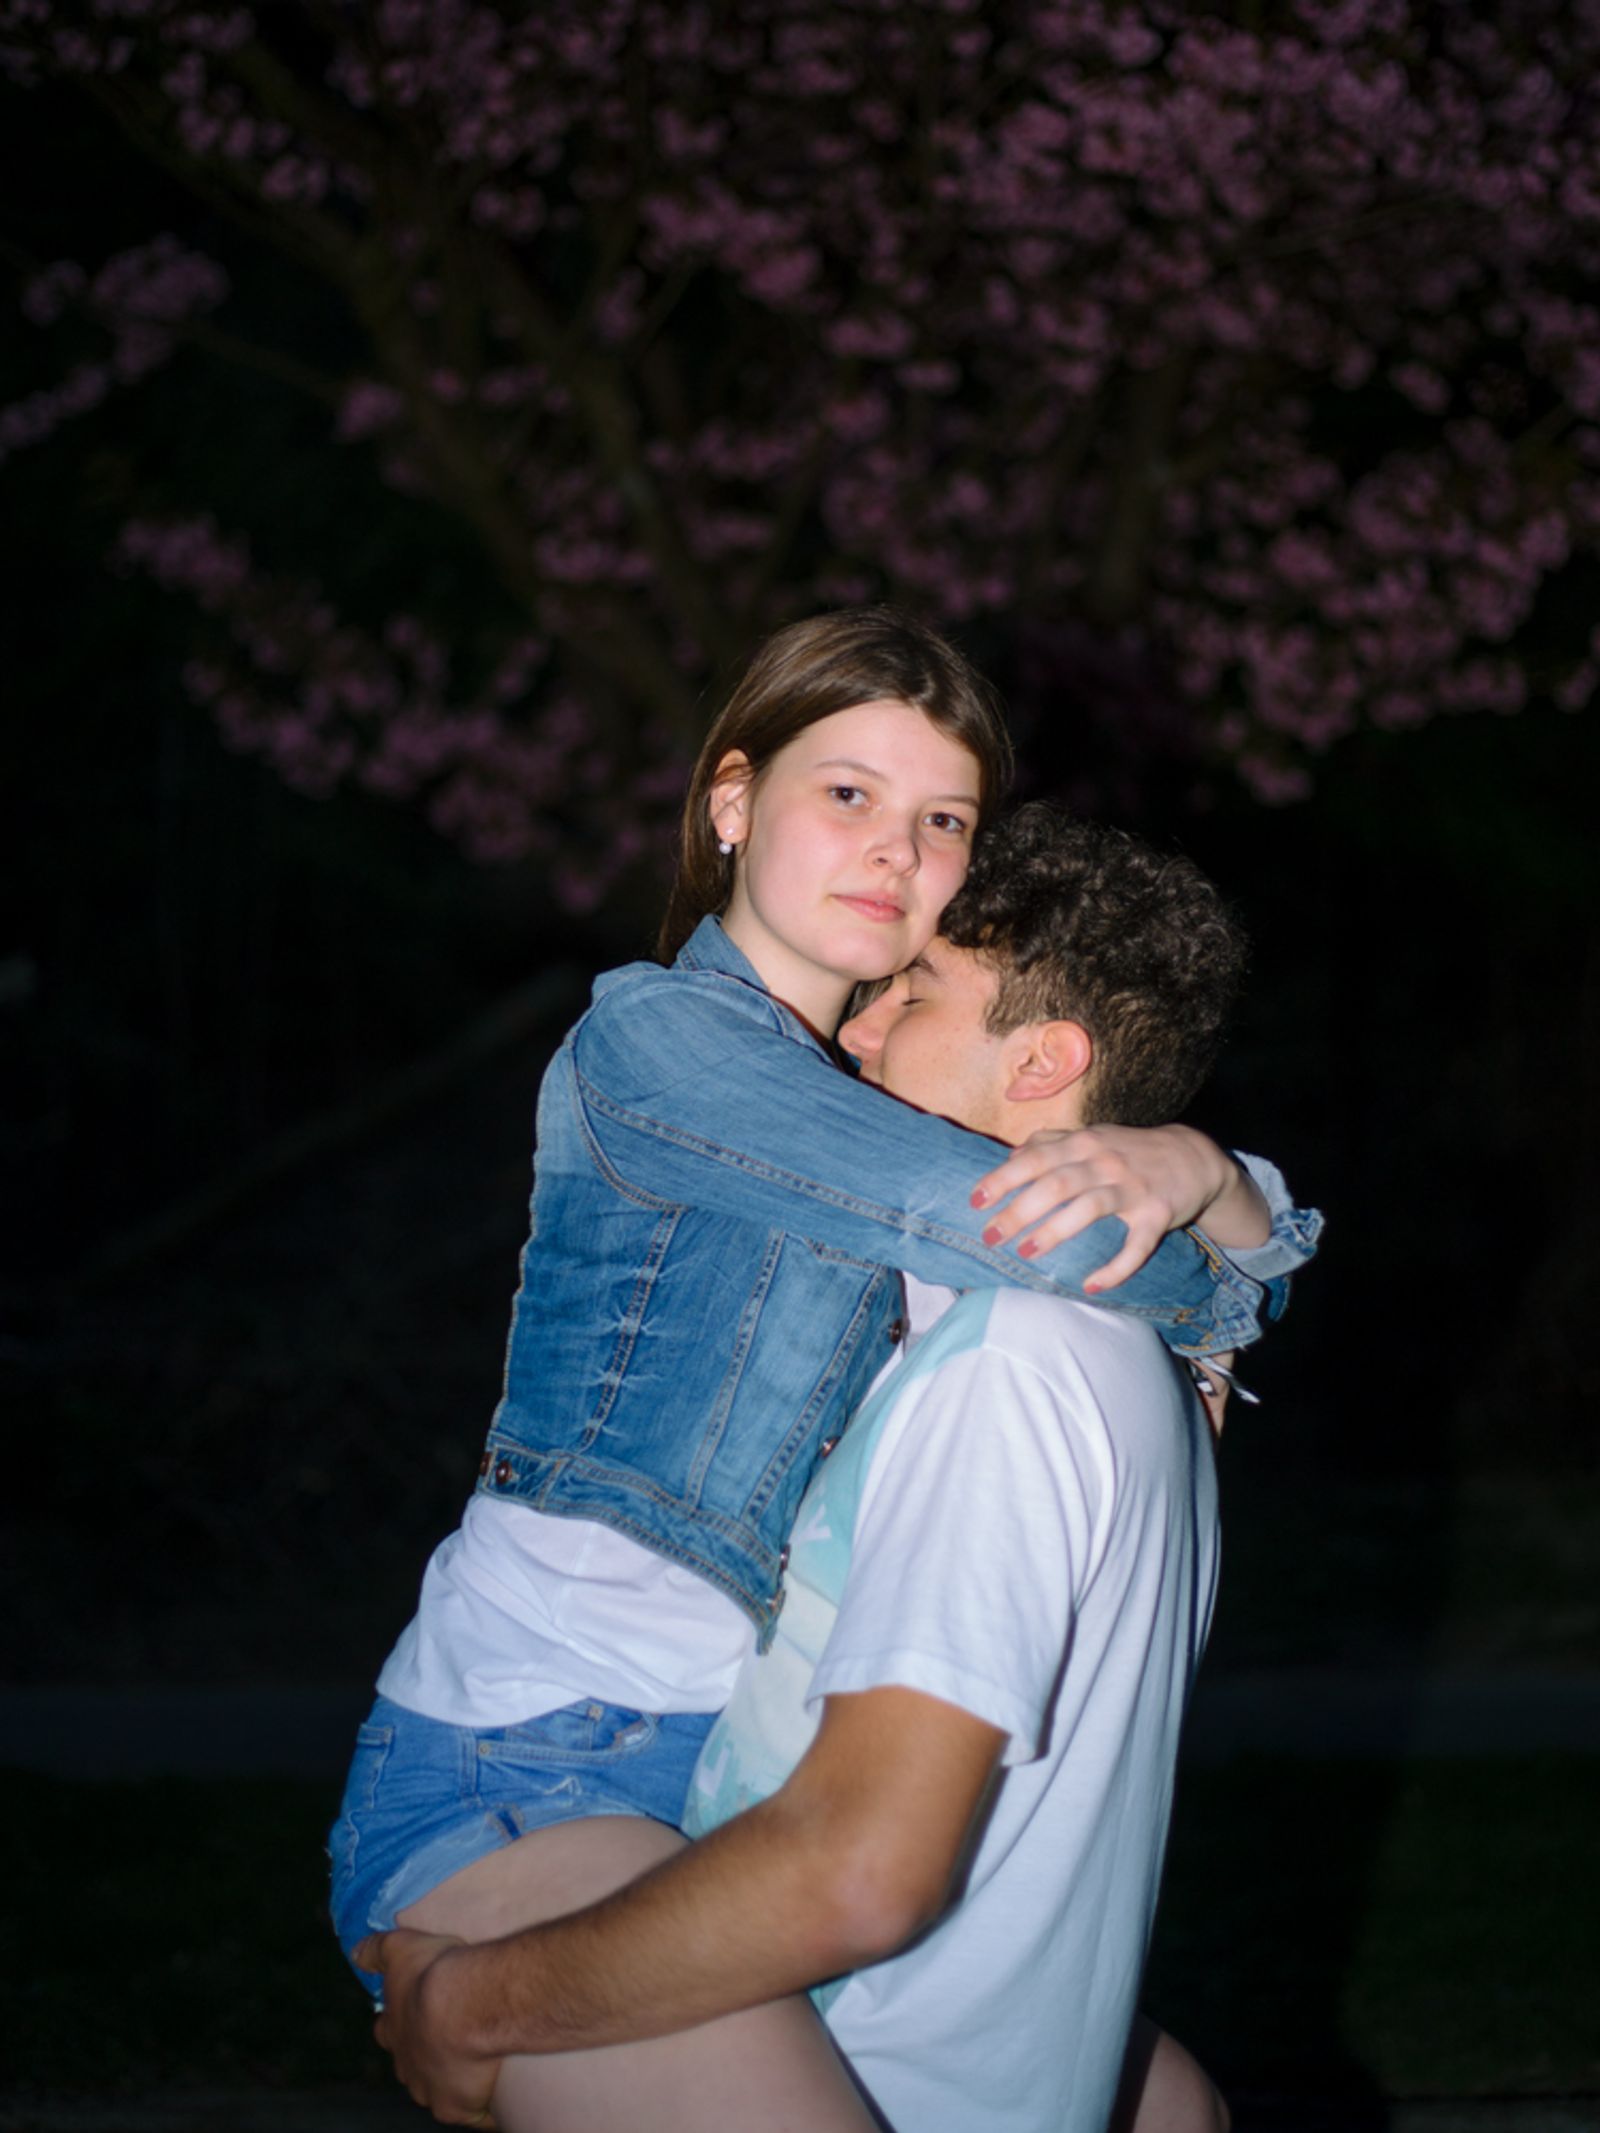 © Lea Franke - "Lars carries Ronja on his arm in front of a blossoming cherry tree, Ronja's favorite flowers"